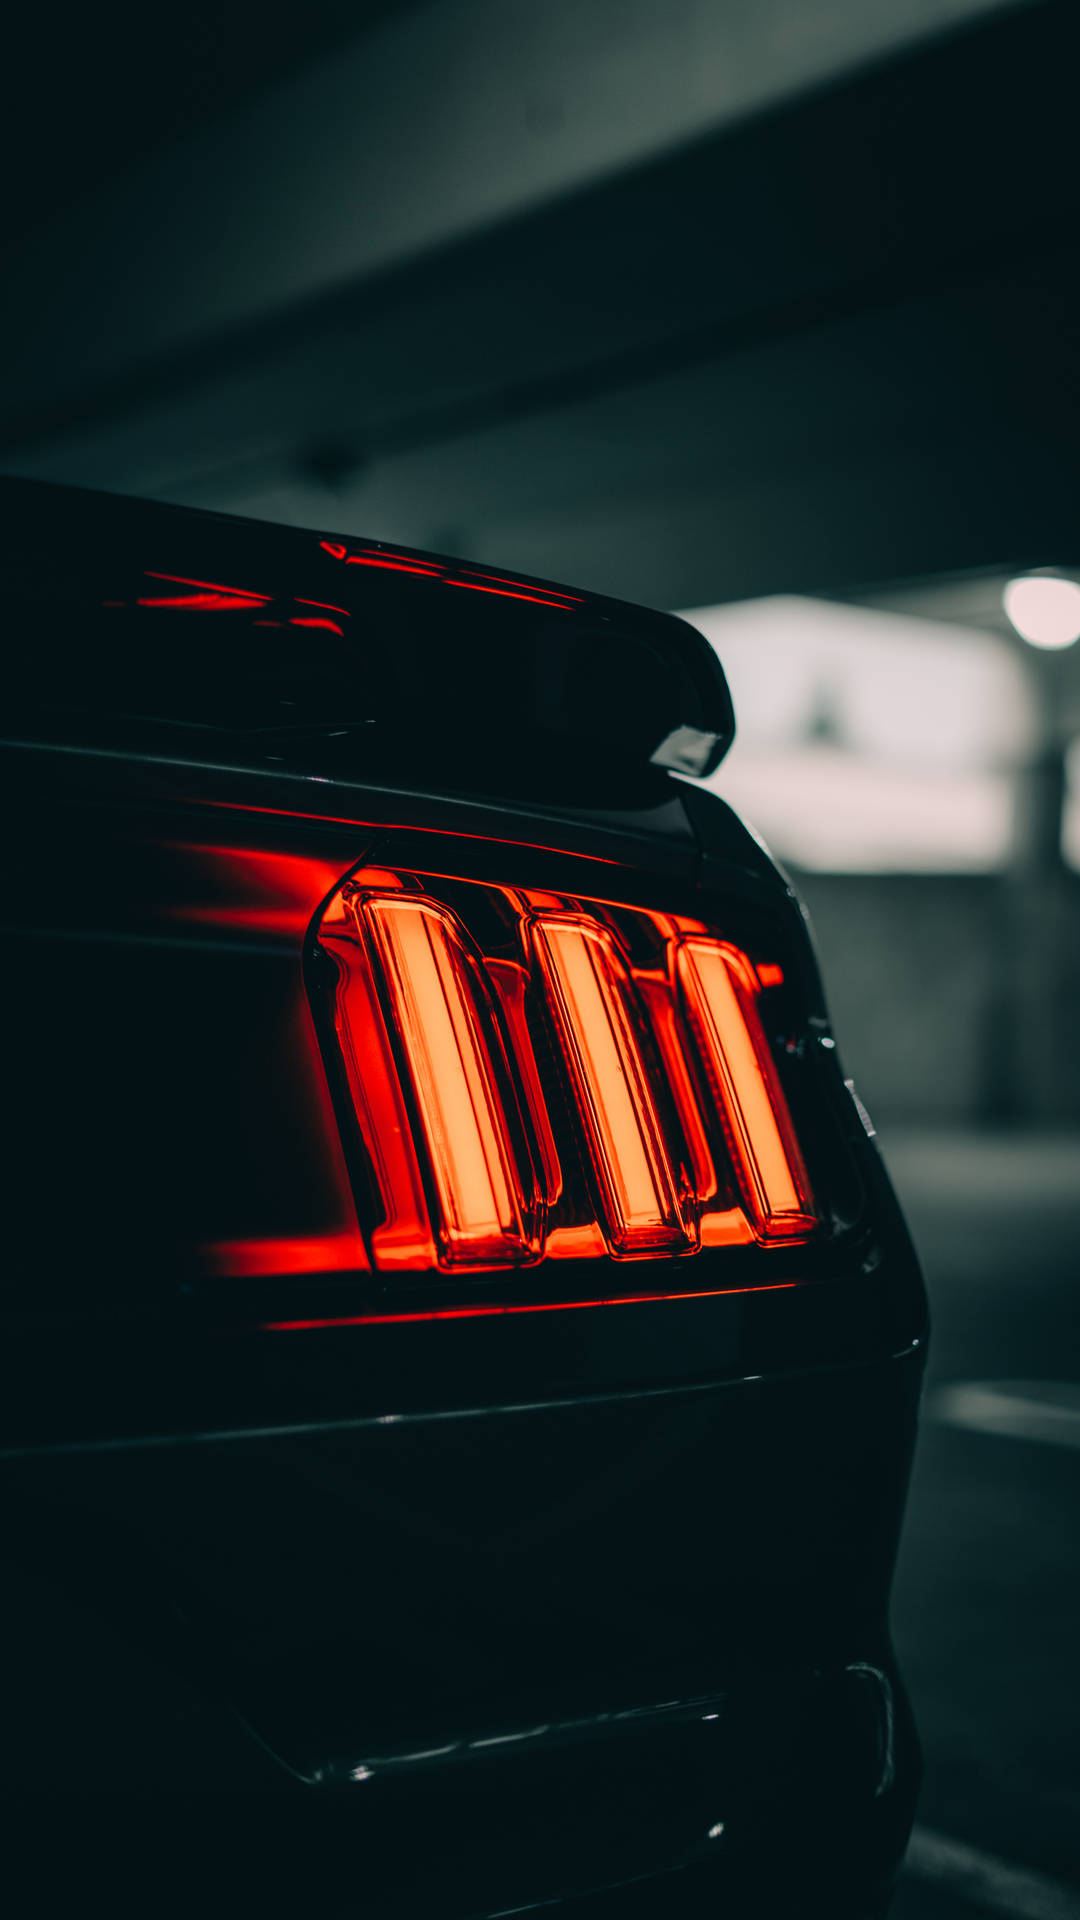 The Red and Black contrast of a Tail Light Wallpaper